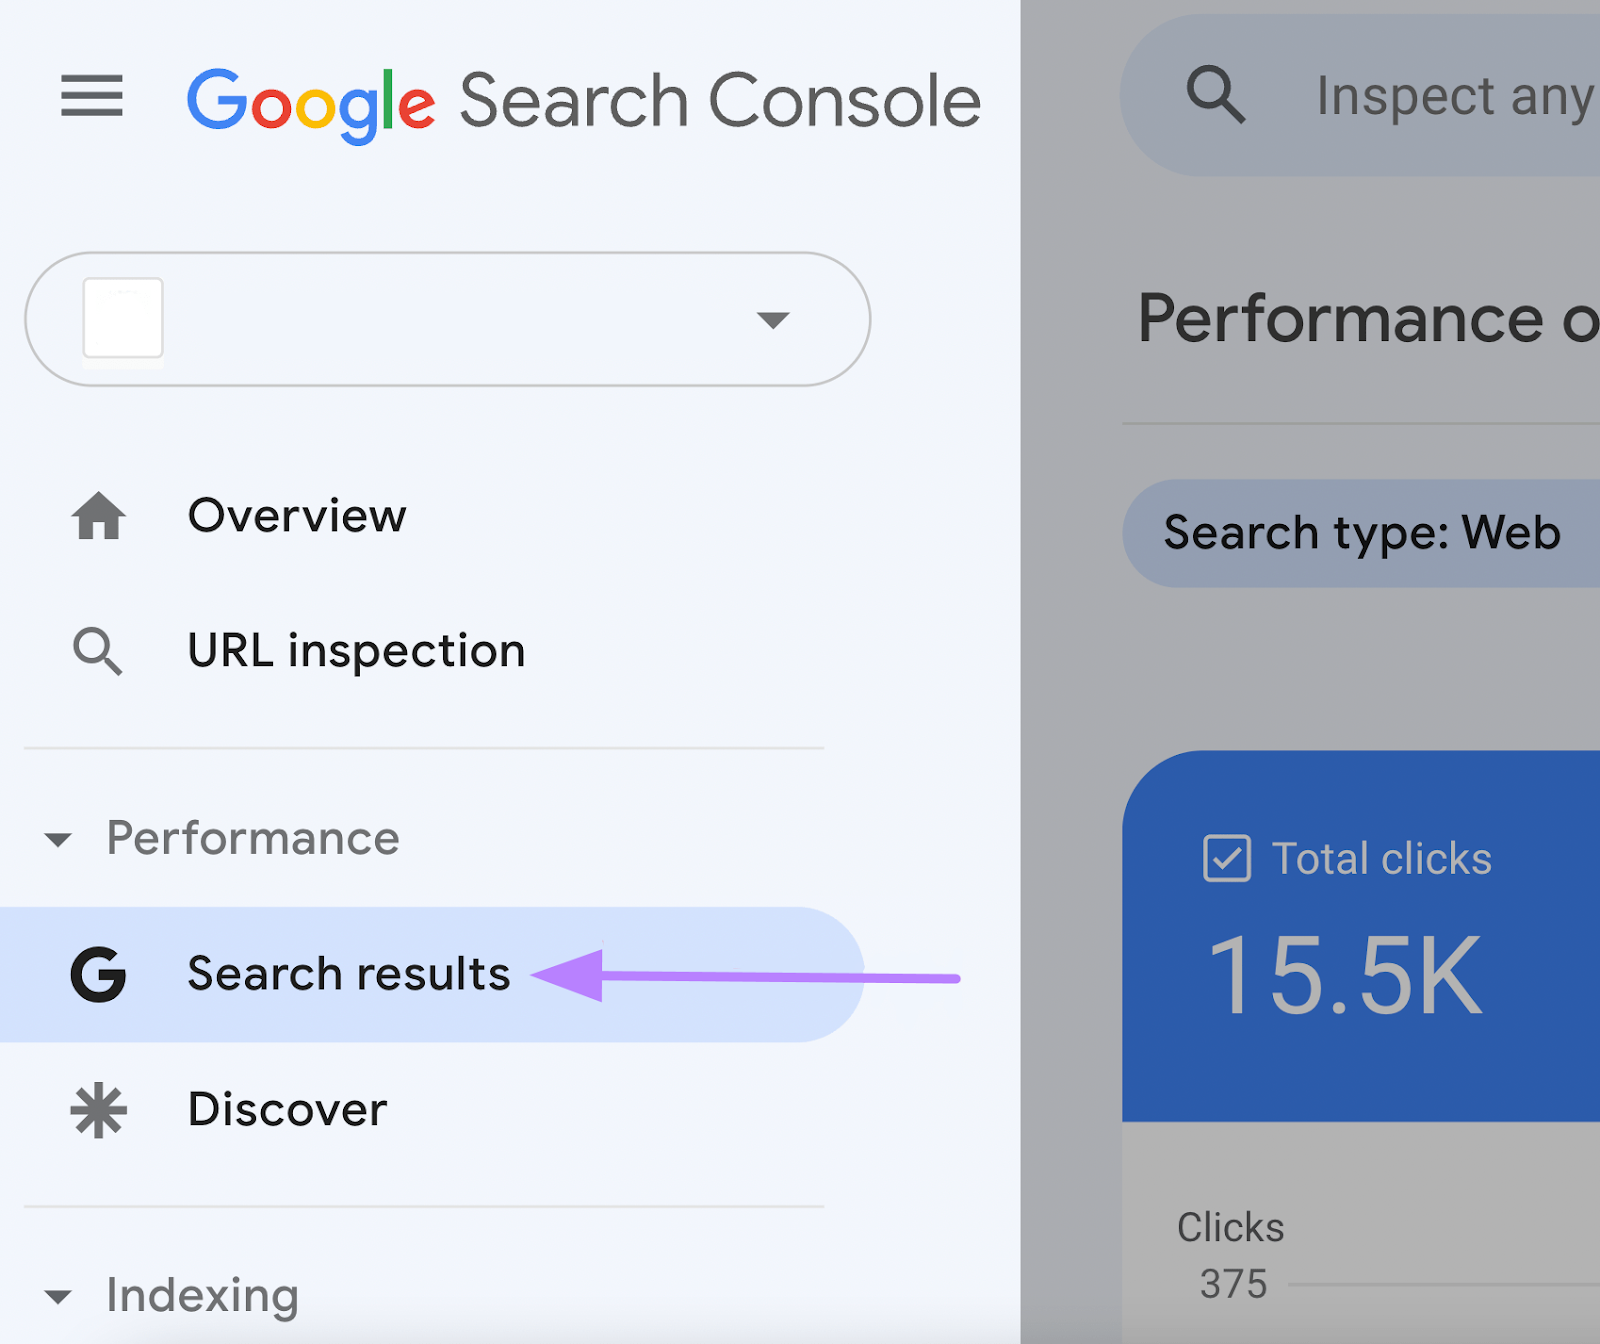 navigation to “Search results” in GSC